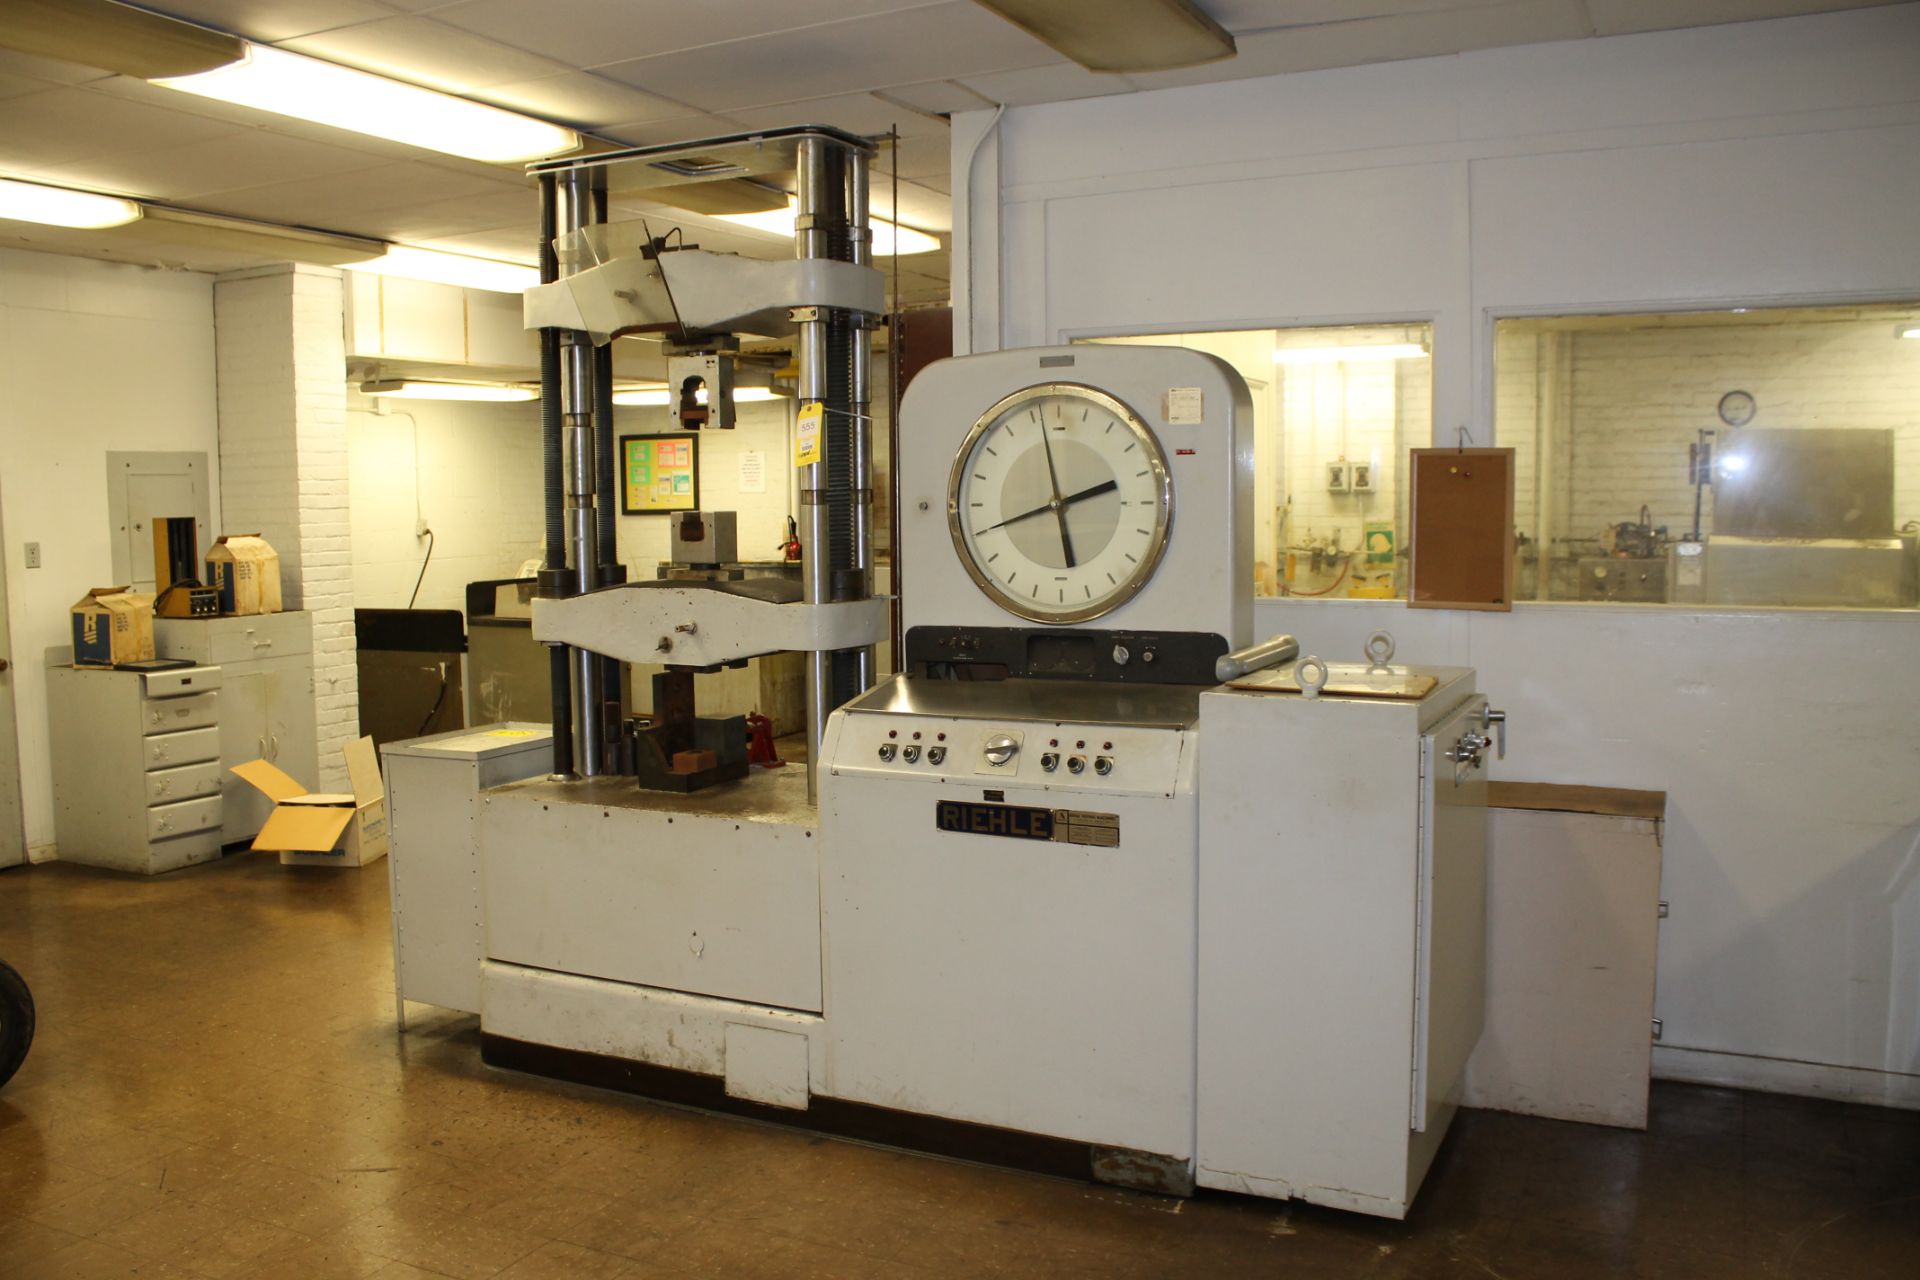 Riehle 160,000 lb. Tensile Tester Model F.S. 160, S/N RA18100. (Location C)